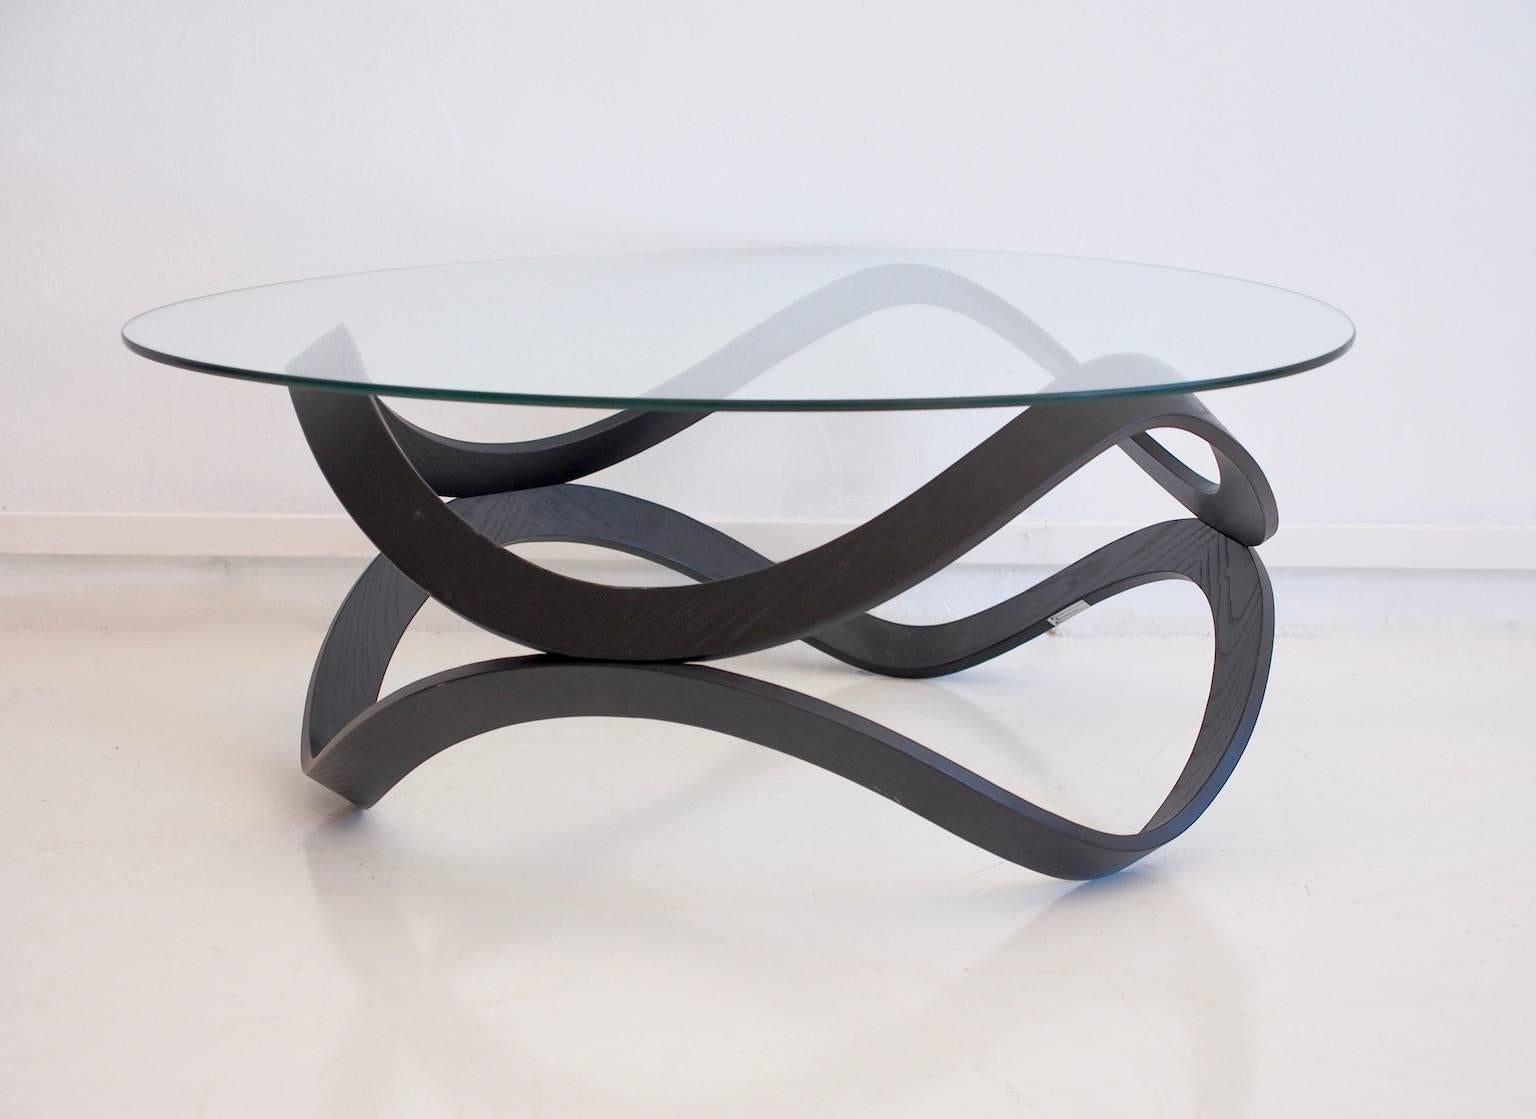 Beautiful NEWTON shaped table which formed derives from the nature of the two rings which converge towards the center. This coffee table won the Nordic Design Prize in 2009 and Elle Interior Design Award 2010.